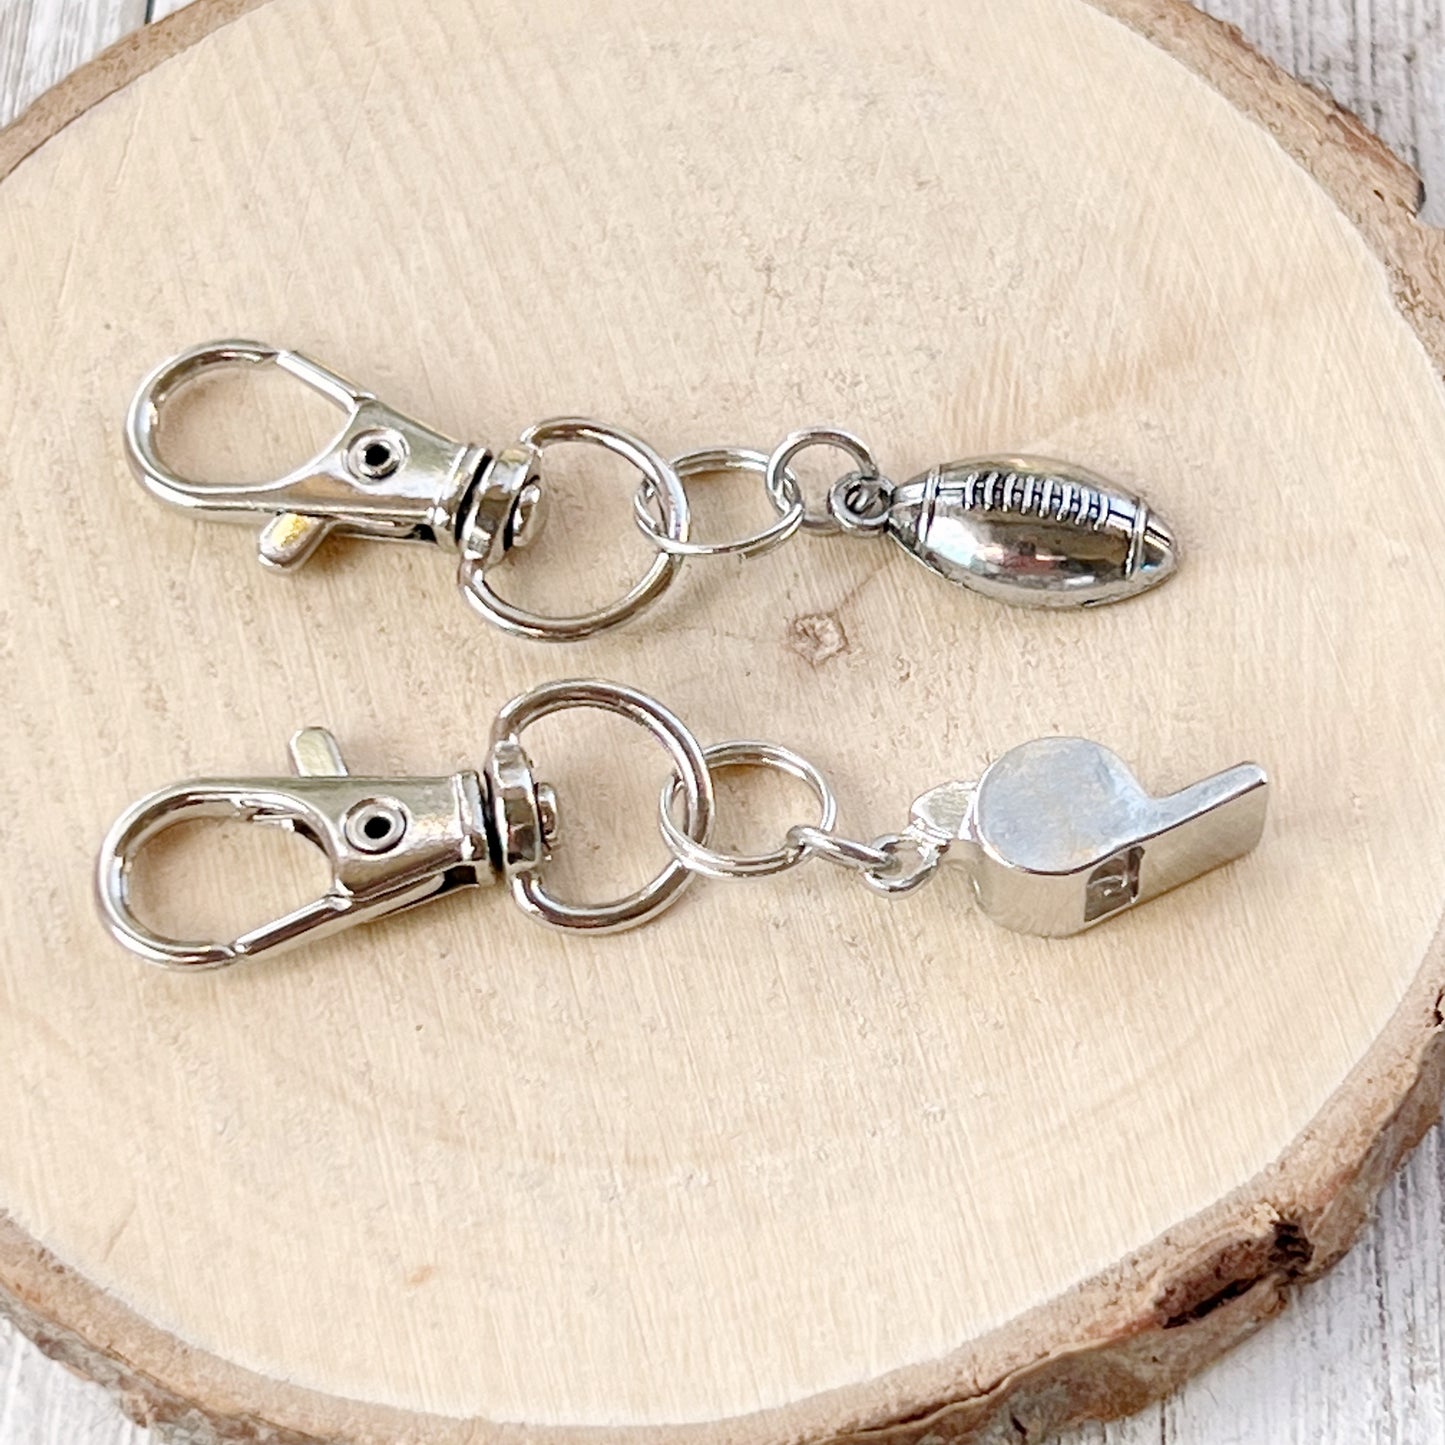 Football Zipper Pull Keychain Charm with Whistle